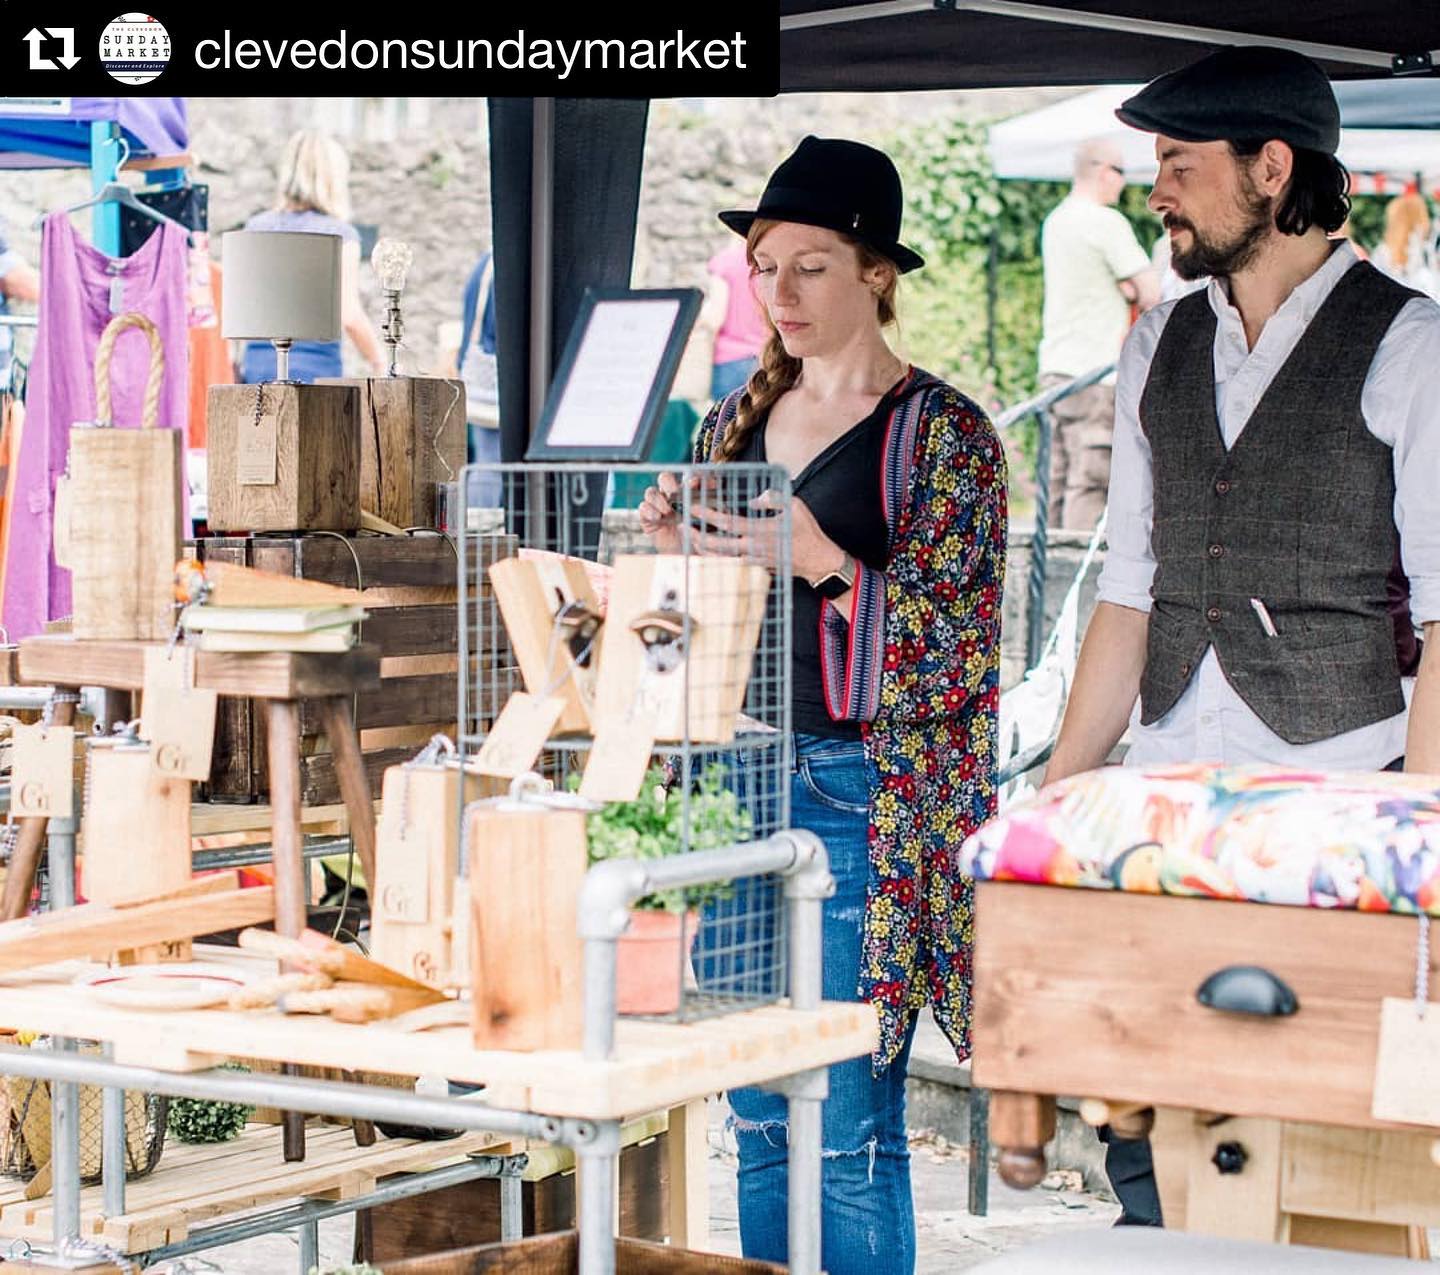 #Repost @clevedonsundaymarket with @get_repost・・・Counting down the days until we’re back in Clevedon under our trusty gazebo. Our set up may be a little different on Sunday, but we’ll have our full selection with us plus some new products we’ve been working on throughout lockdown.We will be maintaining social distancing at all times and providing hand sanitiser on our stall. Please don’t be offended if we ask that you don’t handle products unless you intend to purchase them, we just want to keep everyone as safe as possible.If anyone would like to look at products a little more closely, we’ll be more than happy to demonstrate items. Looking forward to seeing you on Sunday! ...#marketday #backtowork #weekendplans #sundaymarket #clevedon #visitclevedon #discoverclevedon #handcrafted #homewares #woodworking #gingerandtweed #localmarket #shopsmall #shophandmade #supportsmallbusinesses